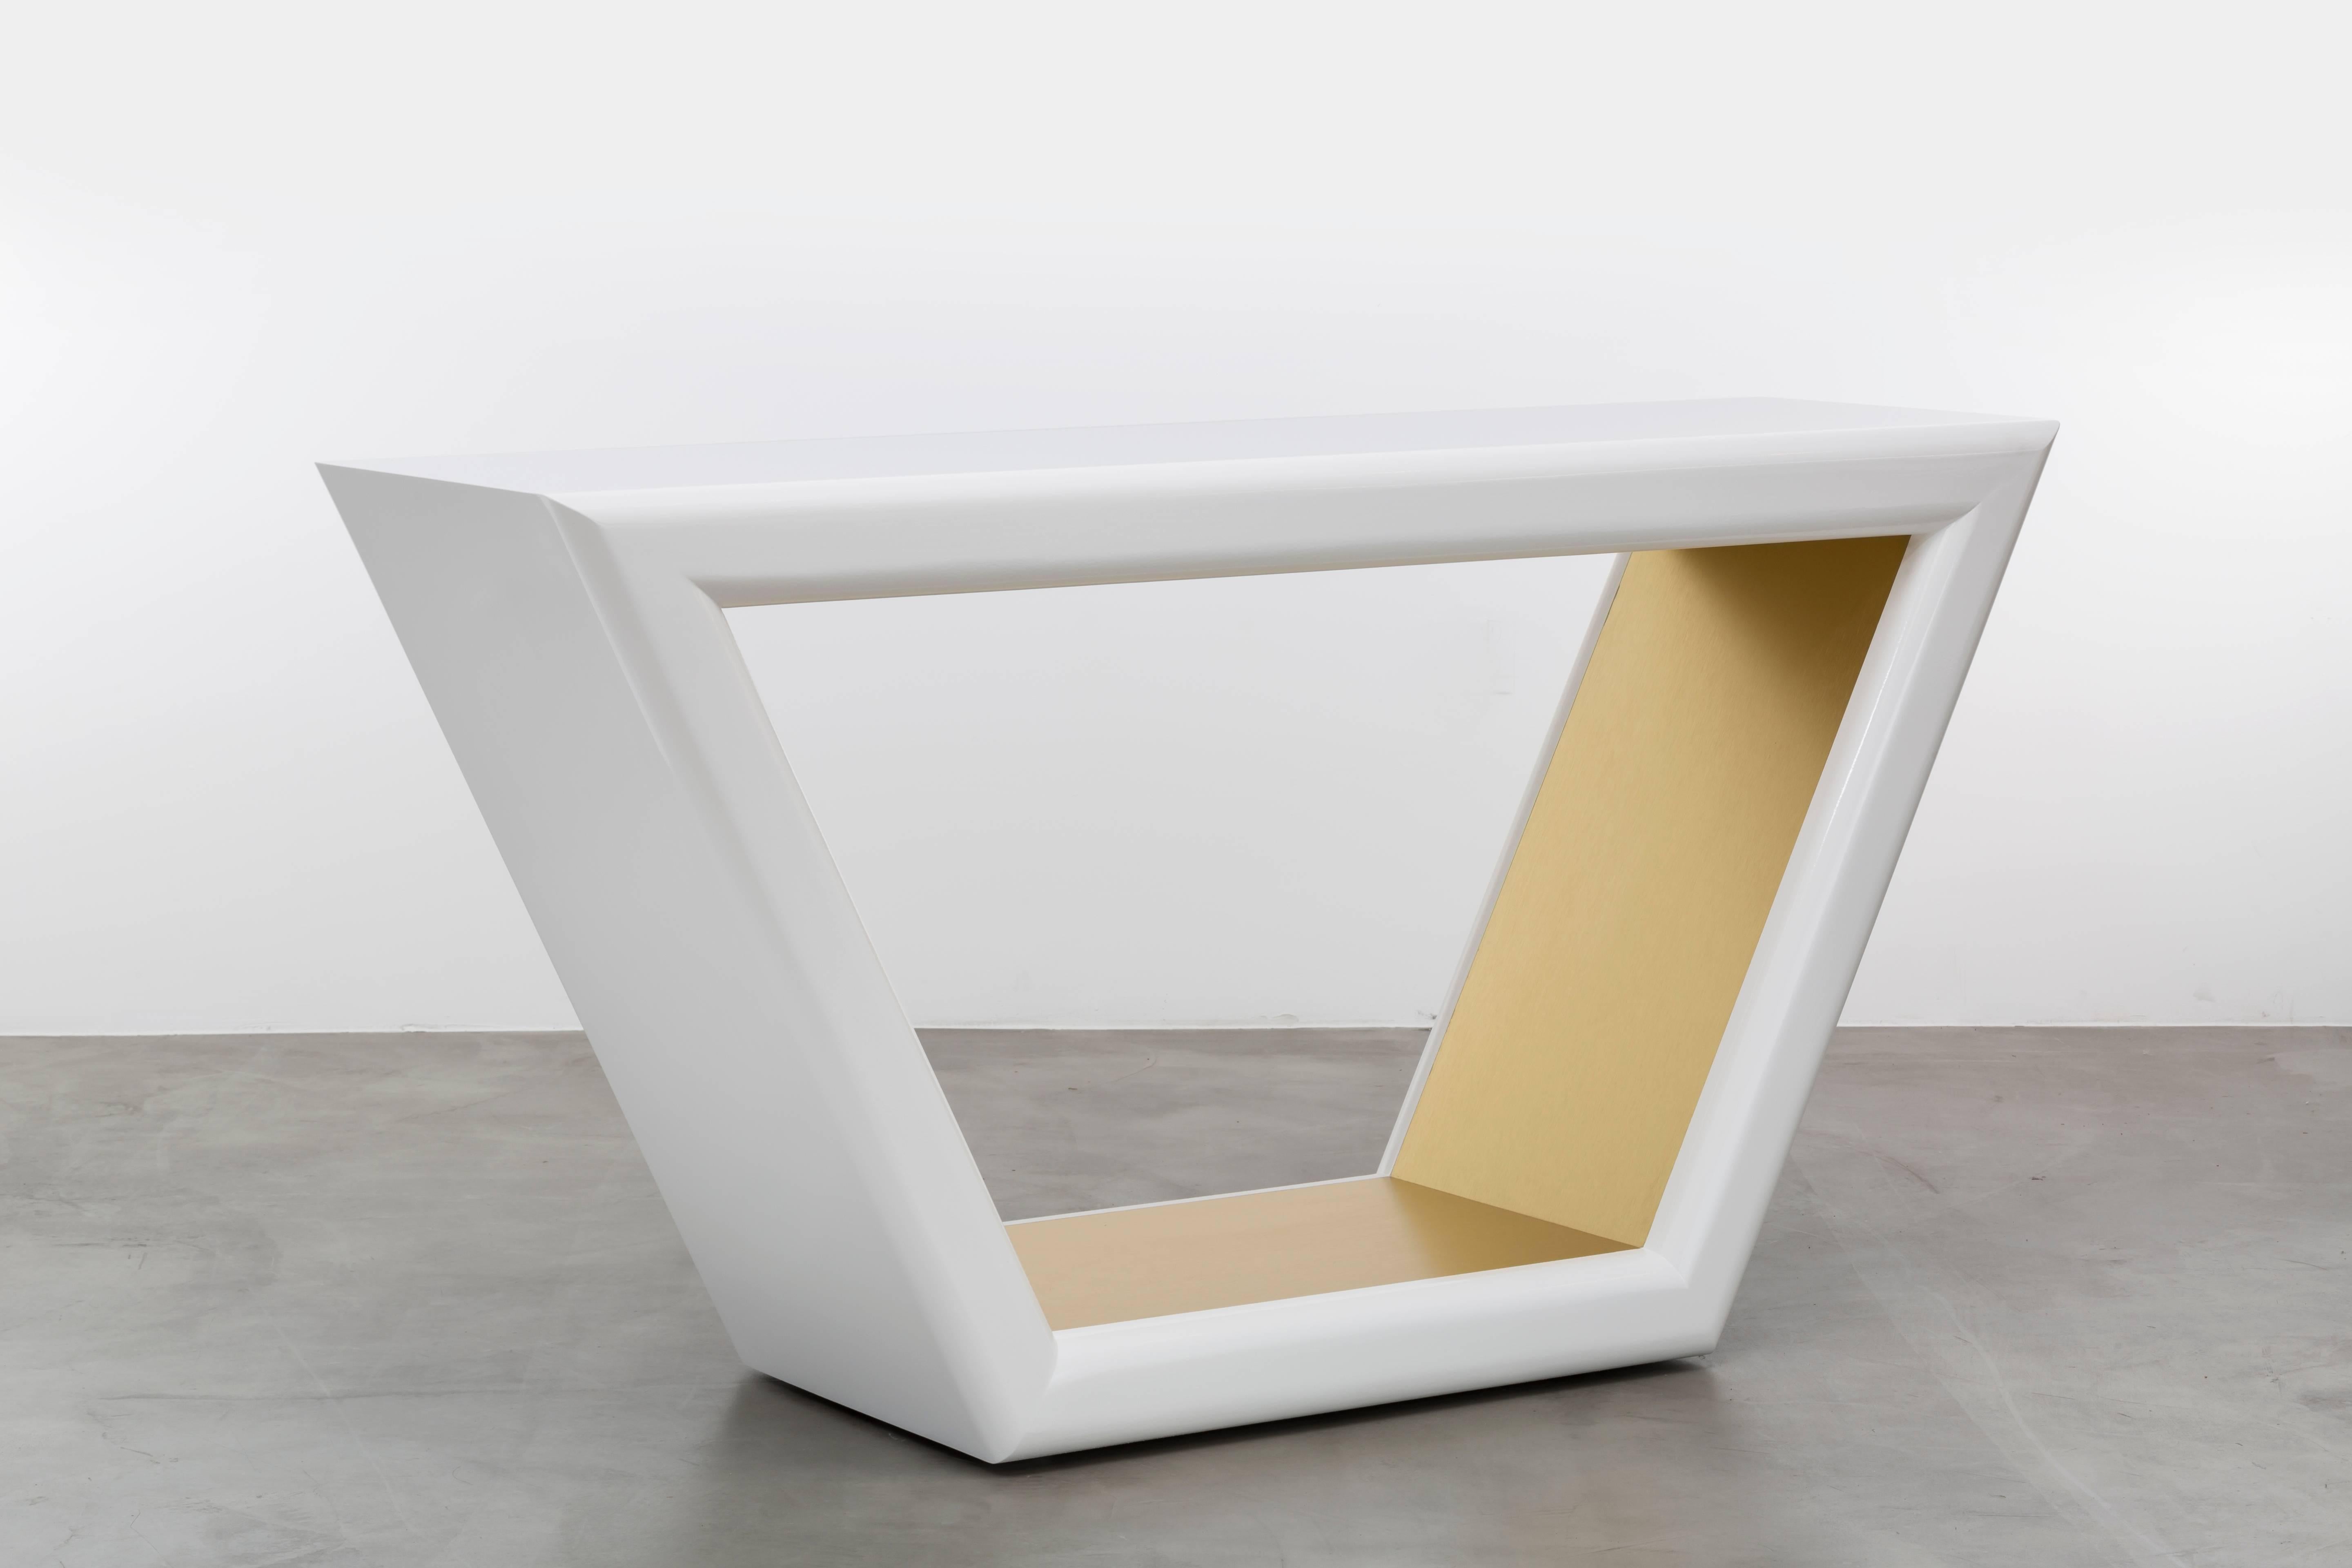 JOLIE CONSOLE TABLE - Modern  White Lacquer Console and Gold Metal Inlay

The Jolie Console Table is a stunning piece of furniture that draws inspiration from the elegant and intricate jewelry of the 1960s. It features a hand-carved bull nose detail